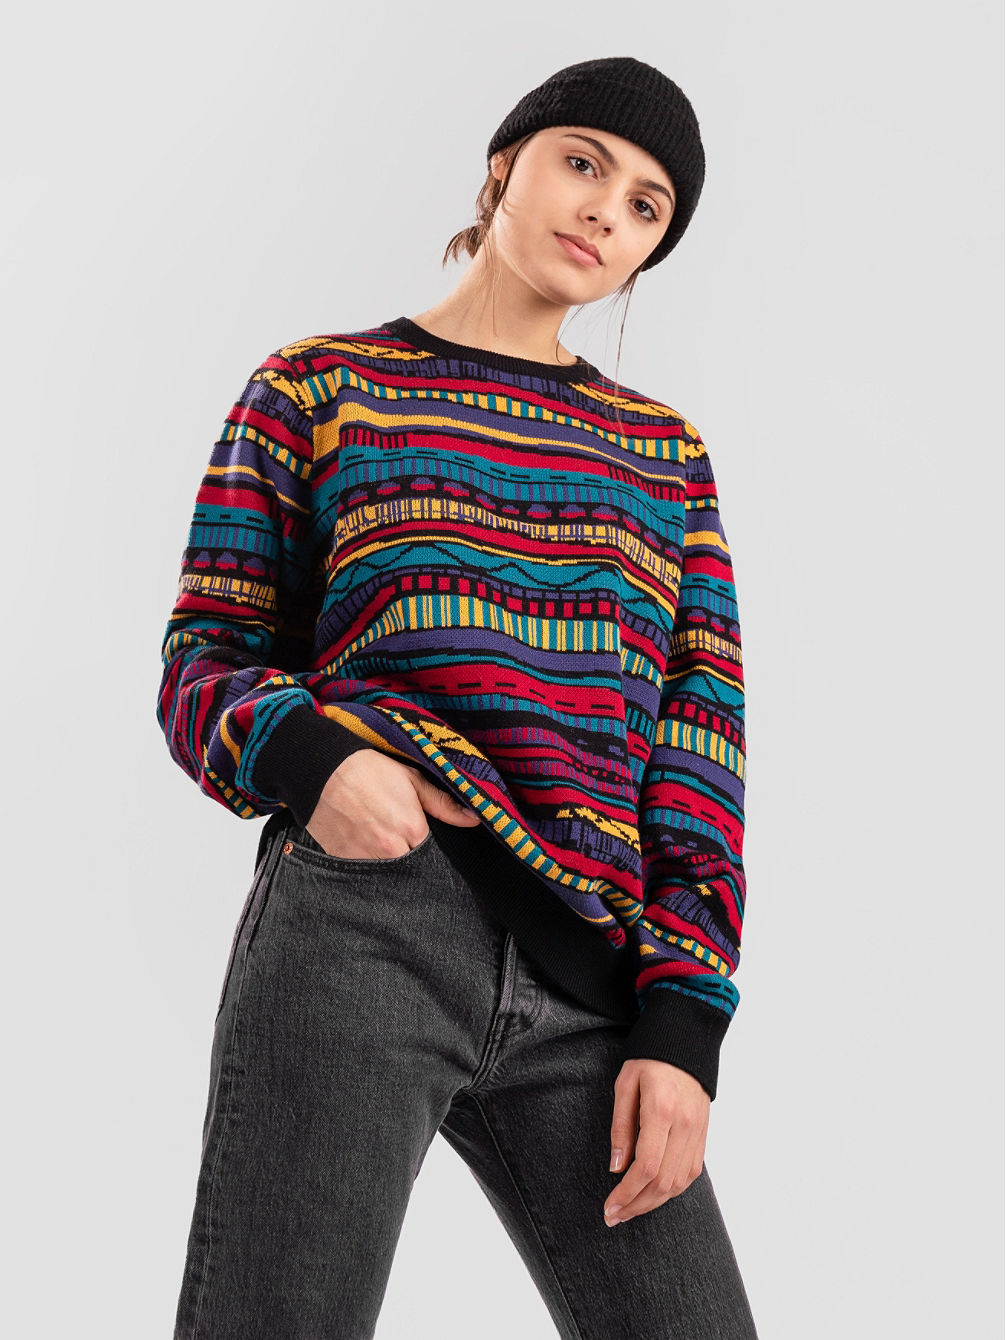 Rudy Knit Pulover